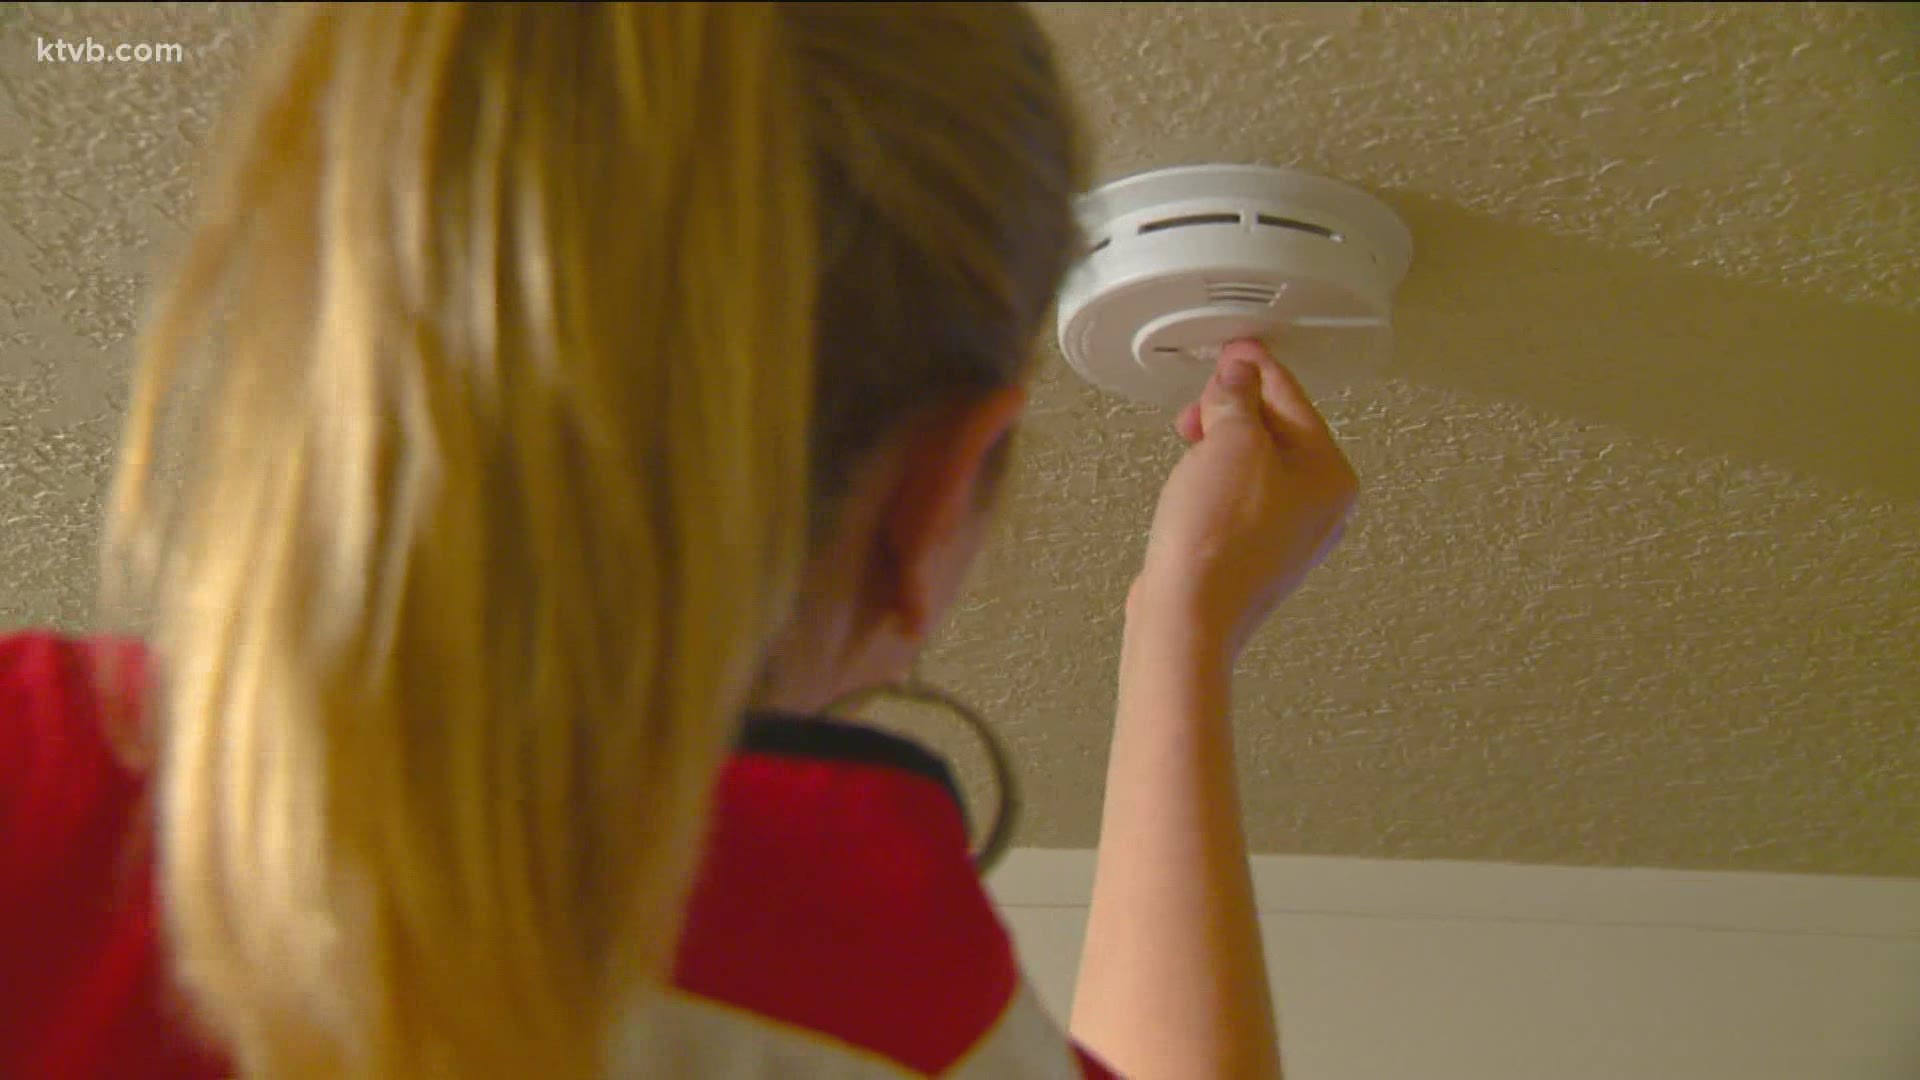 In two recent house fires in Boise, people died in homes where there were no working smoke detectors.